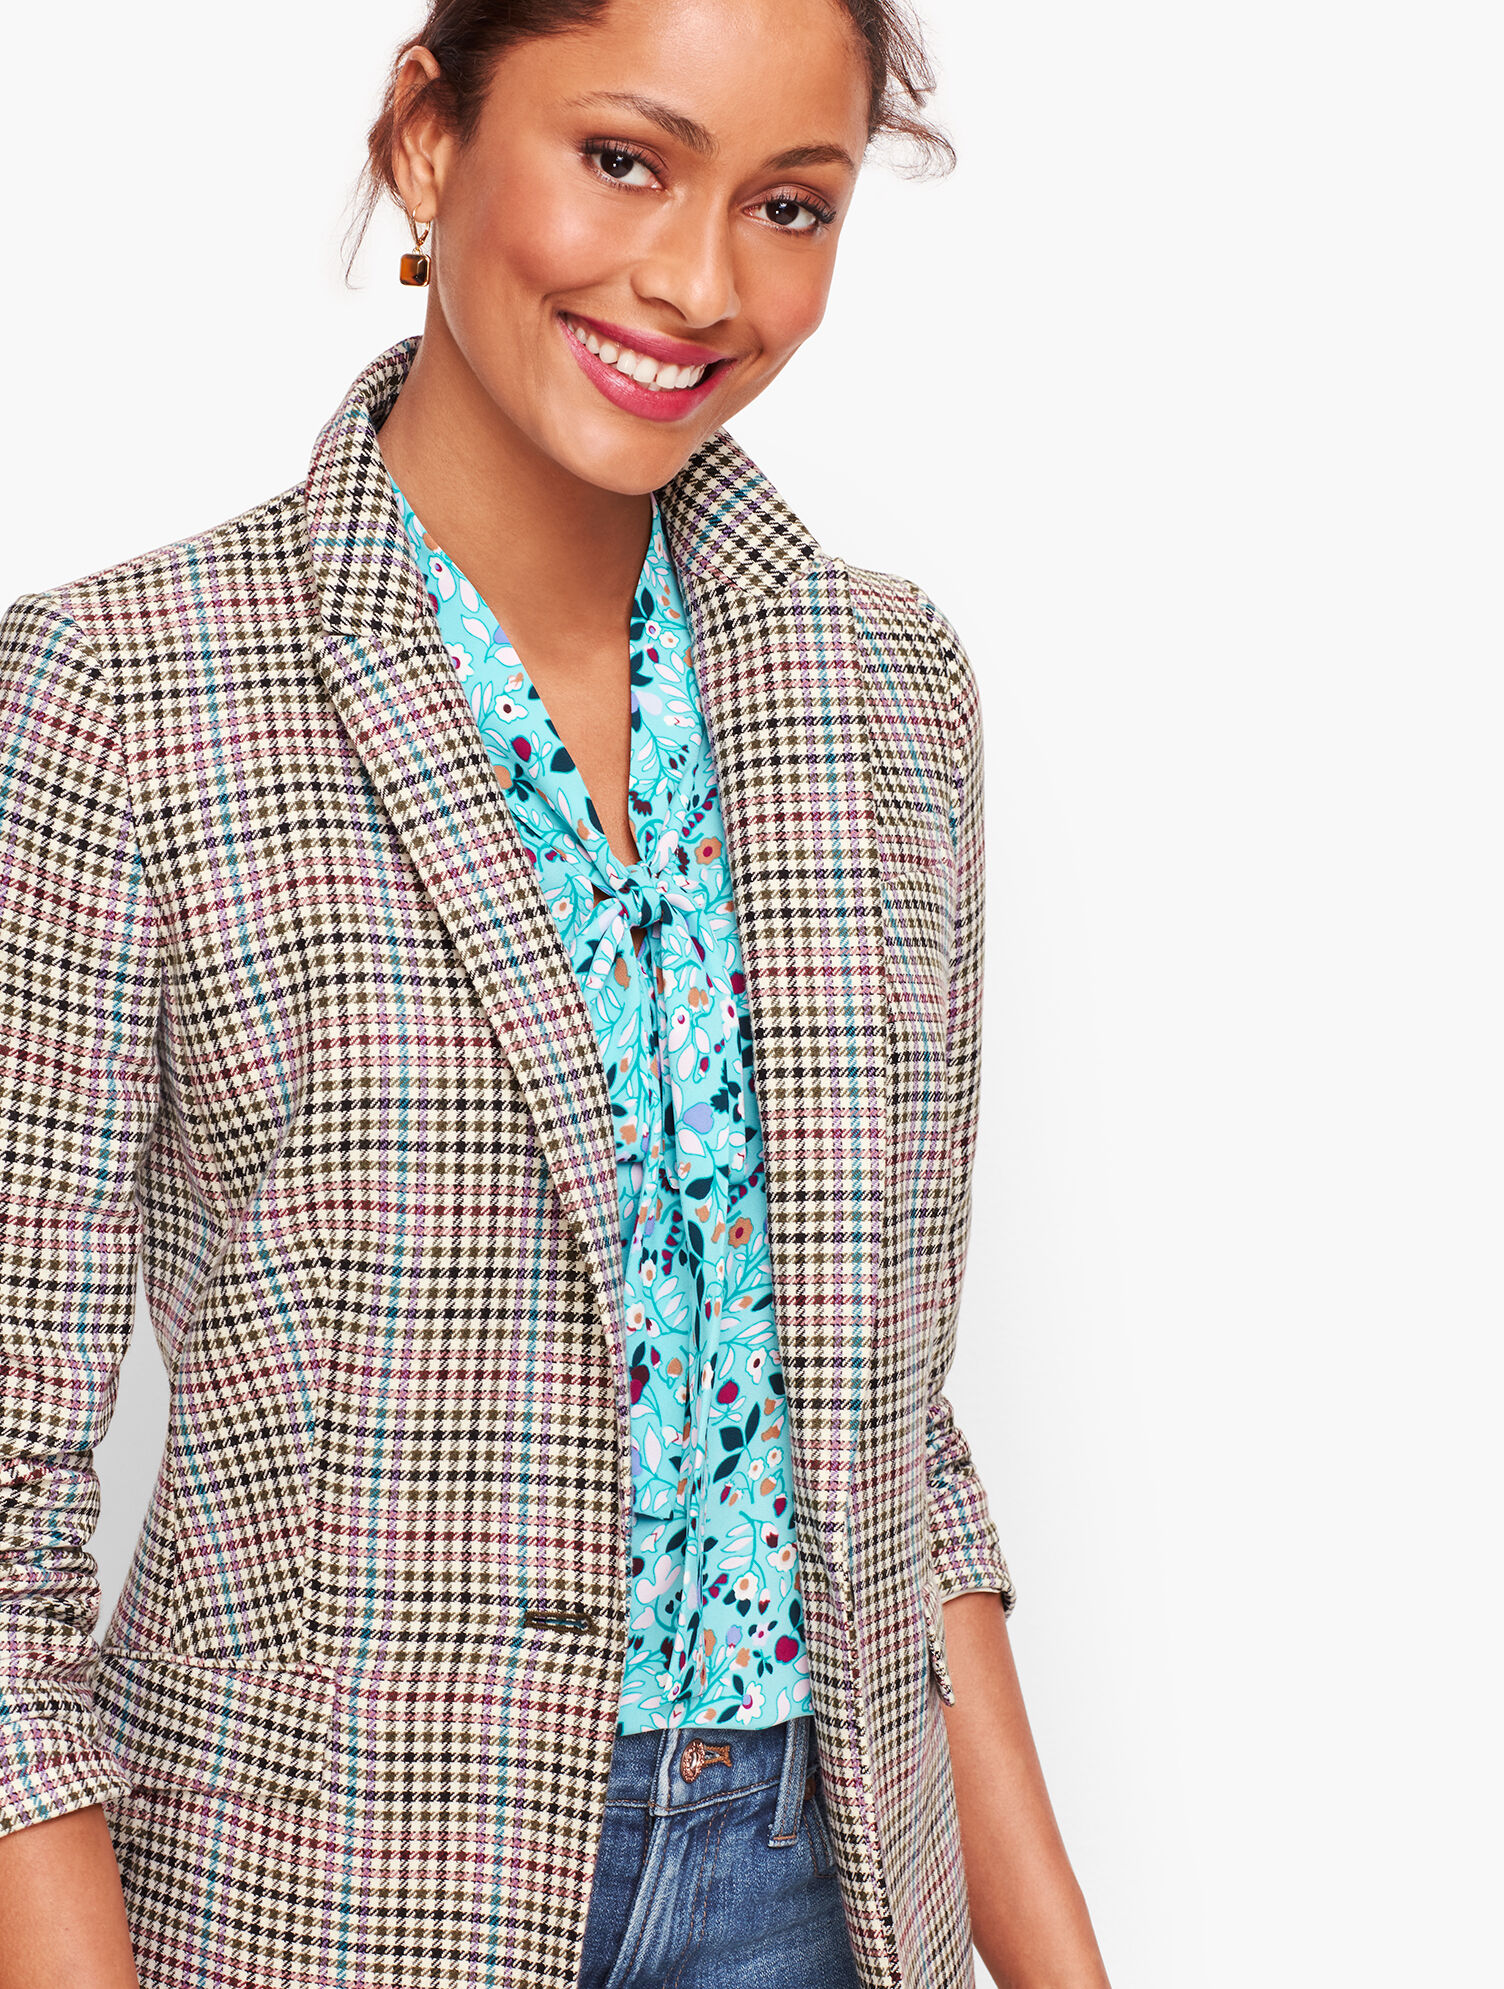 Talbots Jacket Floral Two-Button Blazer Women's Size 6 Casual